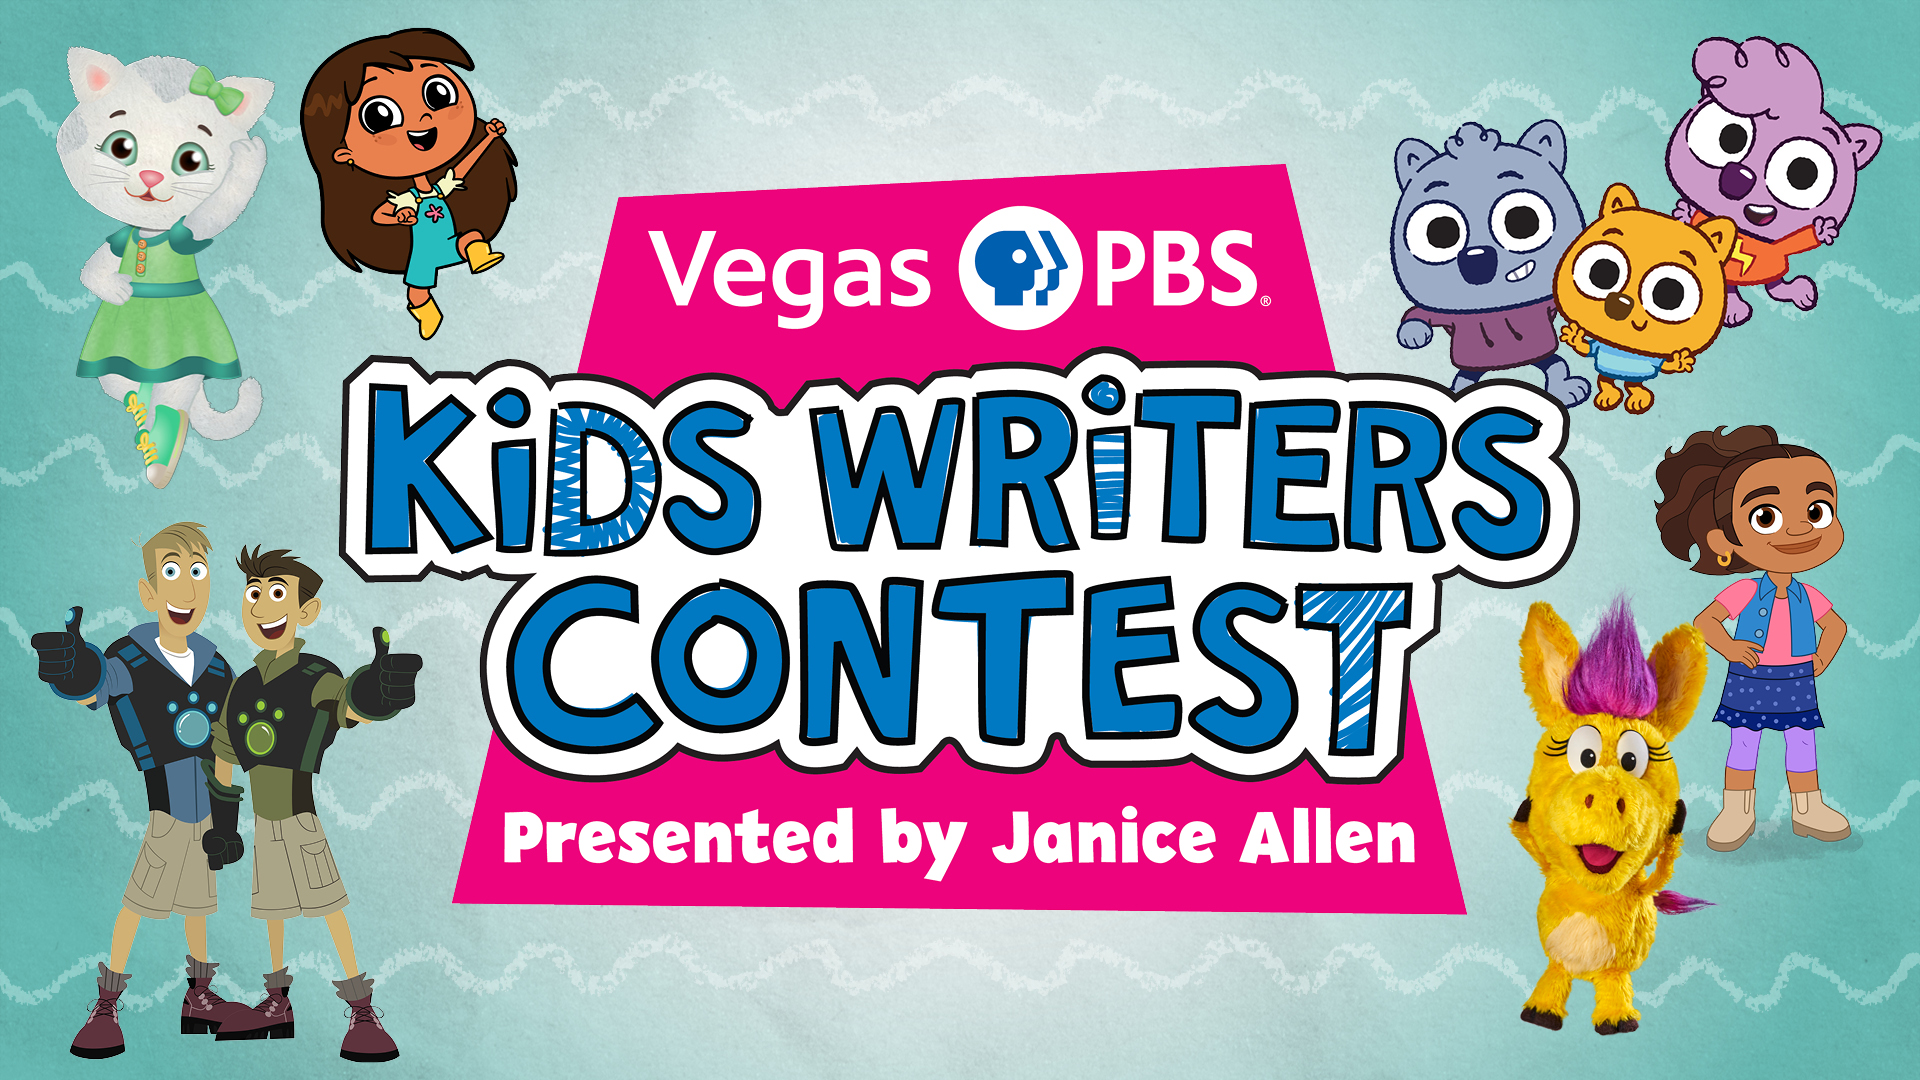 Vegas PBS KIDS Writers Contest open to K-5 students